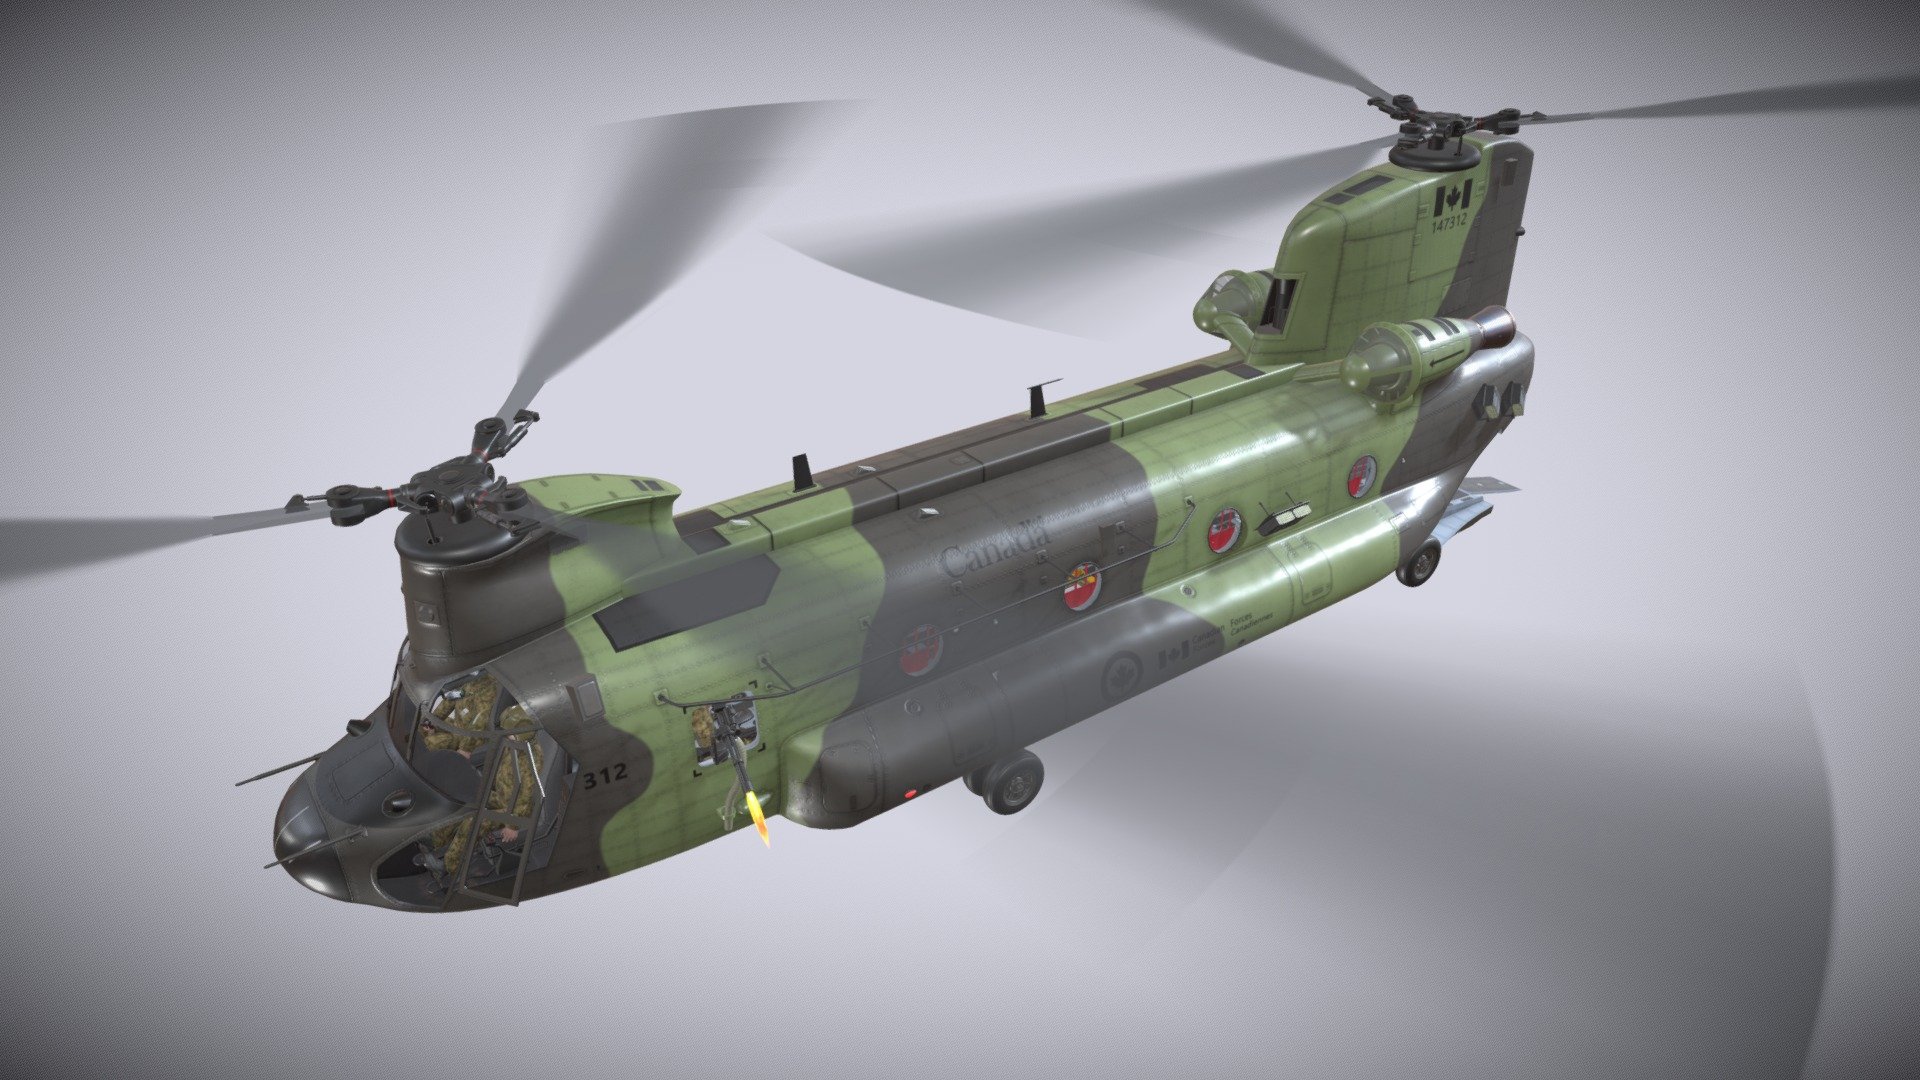 CH-47 Chinook Royal Canadian Air Force  (Complex Animation)

Static and Basic Animation versions are available as seperate models (see my profile models)


File formats: 3ds Max 2021, FBX, Unity 2021.3.5f1


This model contains 62 Animations (See dropdown list below the time line)


This model contains PNG textures(4096x4096):


-Base Color

-Metallness

-Roughness


-Diffuse

-Glossiness

-Specular


-Emission

-Normal

-Ambient Occlusion
 - CH-47 Chinook RCAF Complex Animation - Buy Royalty Free 3D model by pukamakara 3d model